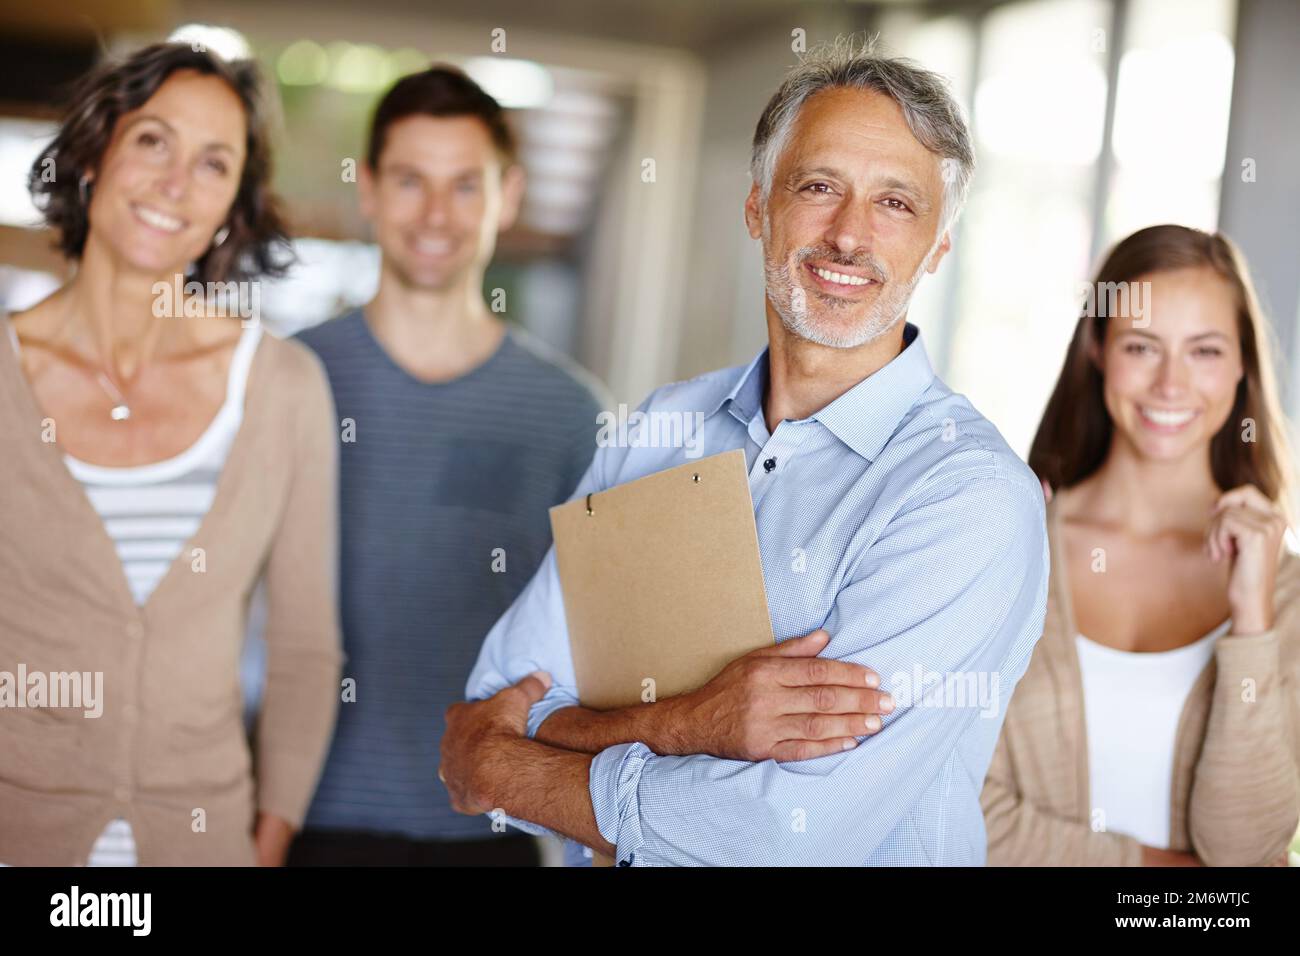 Family comes first. Portrait of two happy parents with their adult children at home. Stock Photo